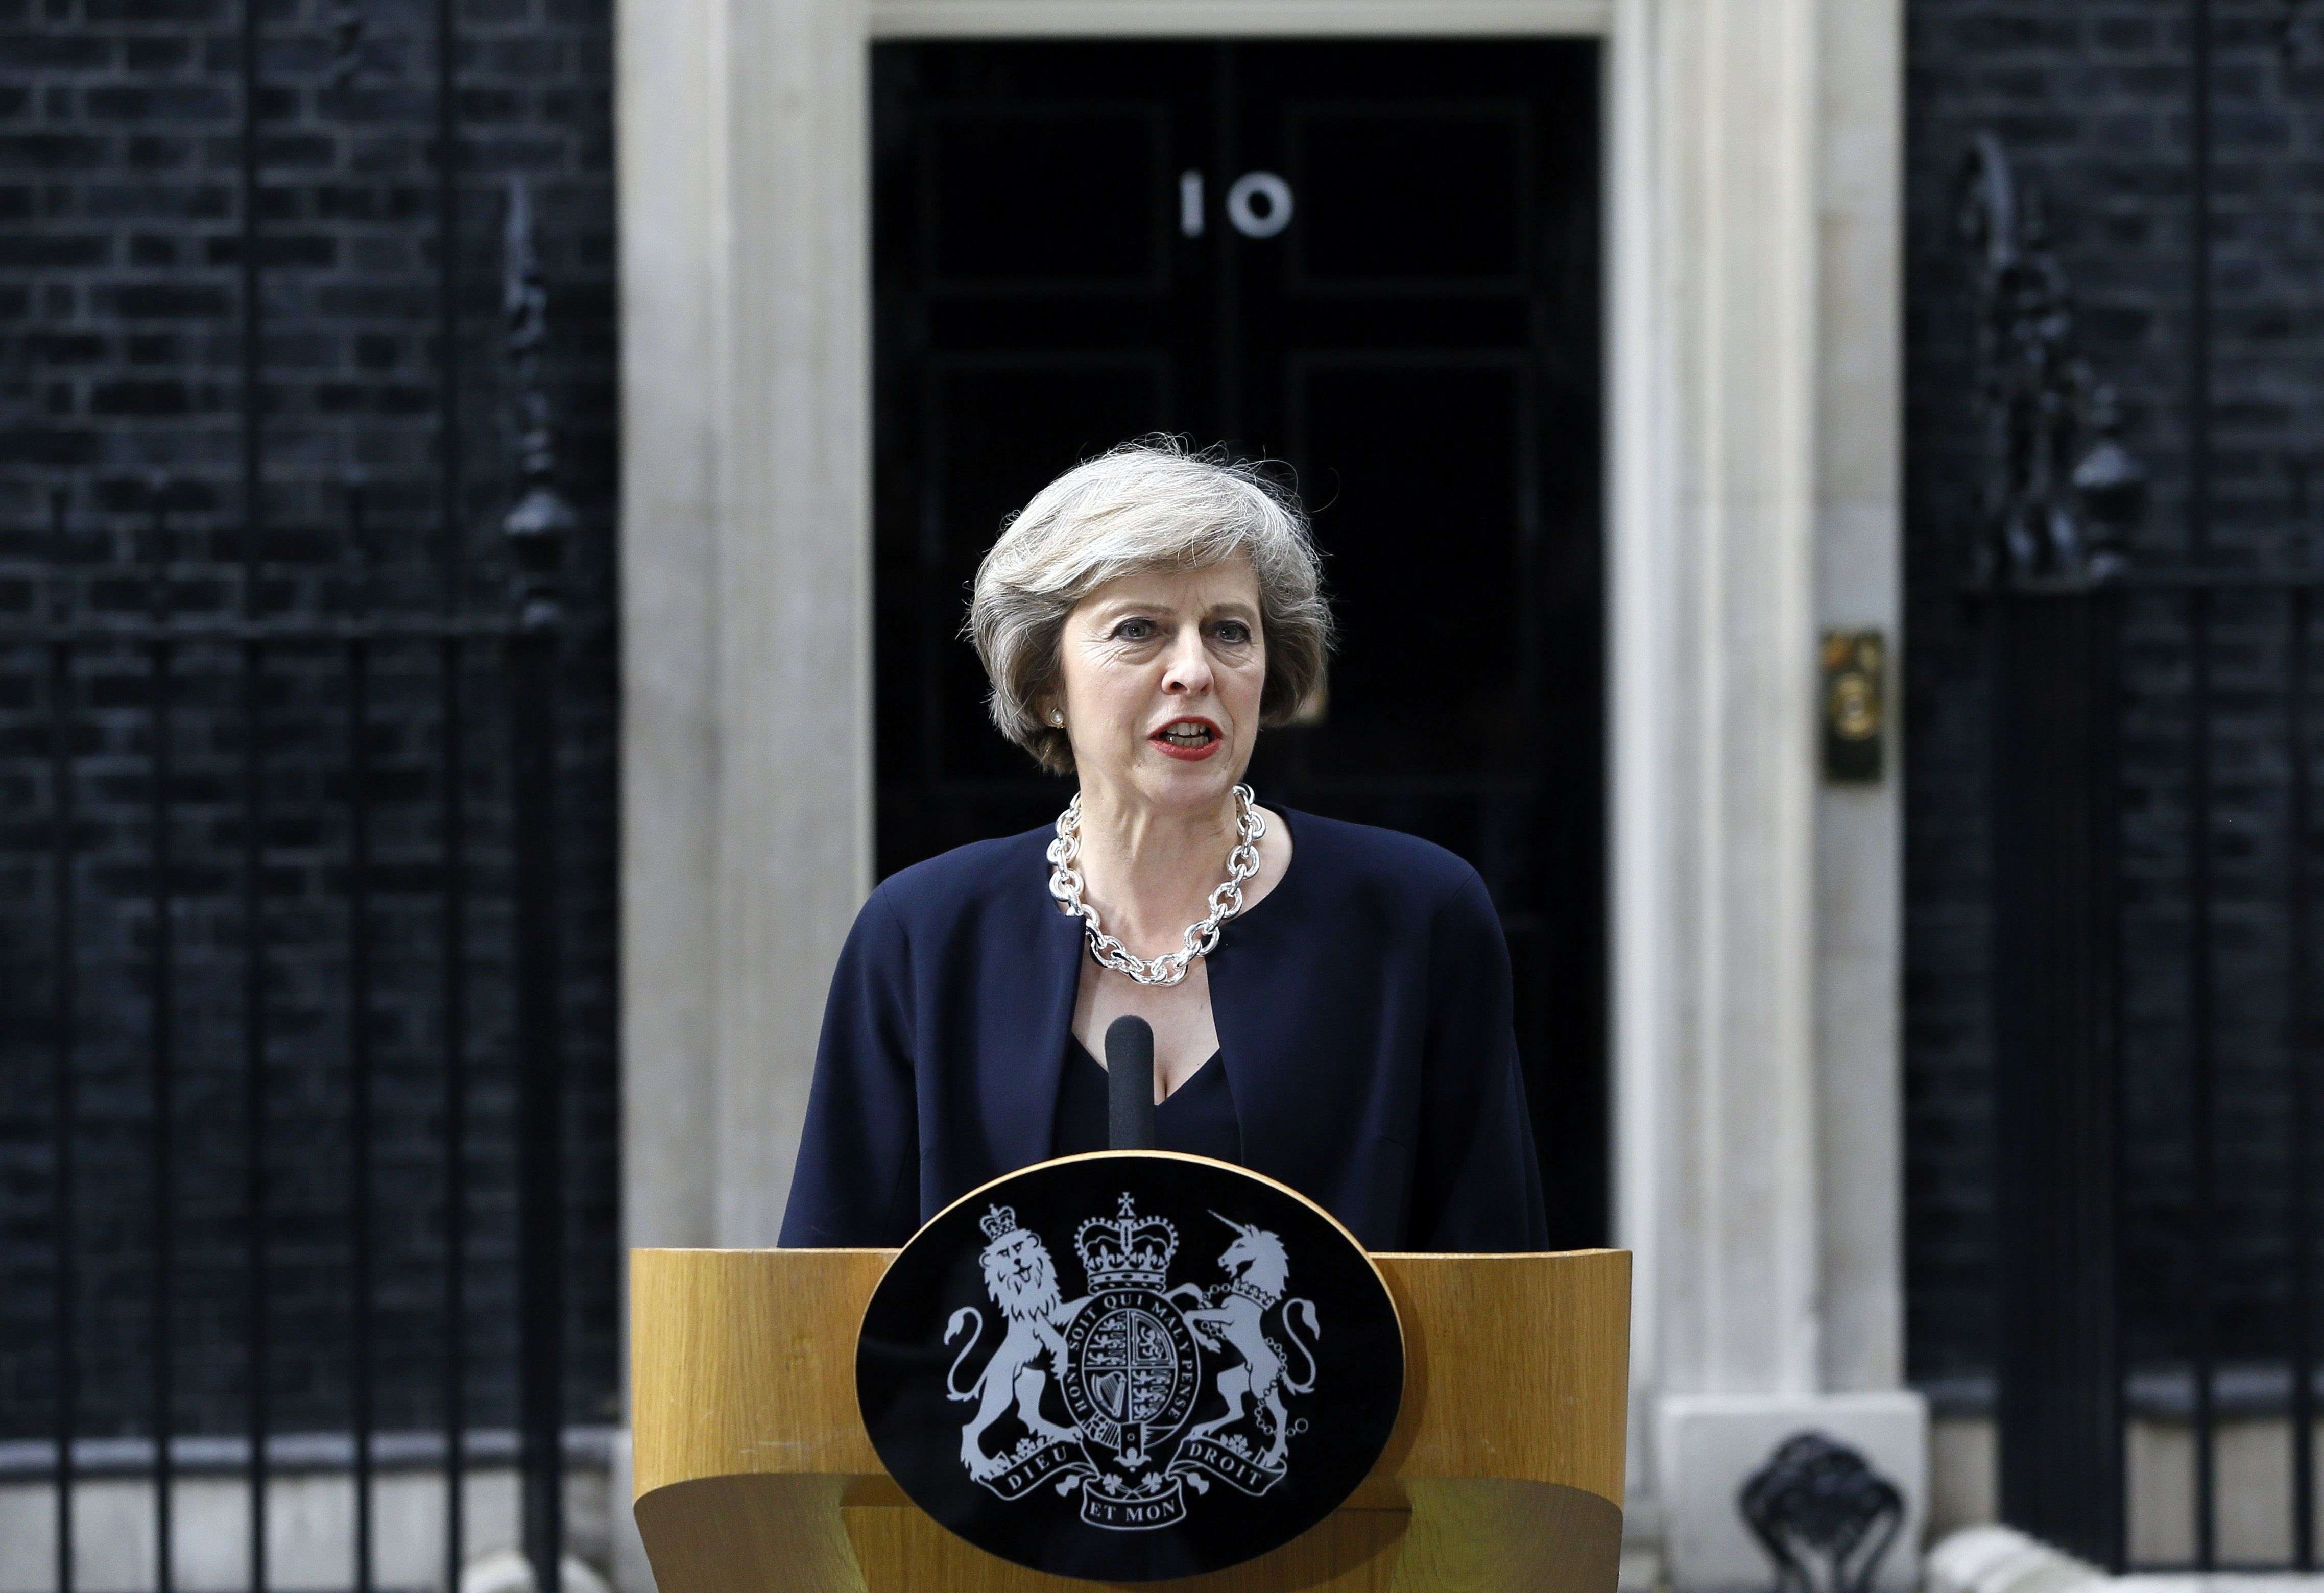 FILE - In this Wednesday July 13, 2016 file photo, new British Prime Minister Theresa May speaks to the media outside her official residence,10 Downing Street in London. Theresa May wanted Britain to stay in the European Union, but the government she unveiled Thursday leaves little doubt that she intends to take it out. The new prime minister has appointed leading euroskeptics - including the unpredictable Boris Johnson and the formidable David Davis - to top international jobs in a Cabinet that sweeps away many of the stalwarts of predecessor David Cameron's administration. (AP Photo/Kirsty Wigglesworth, file)